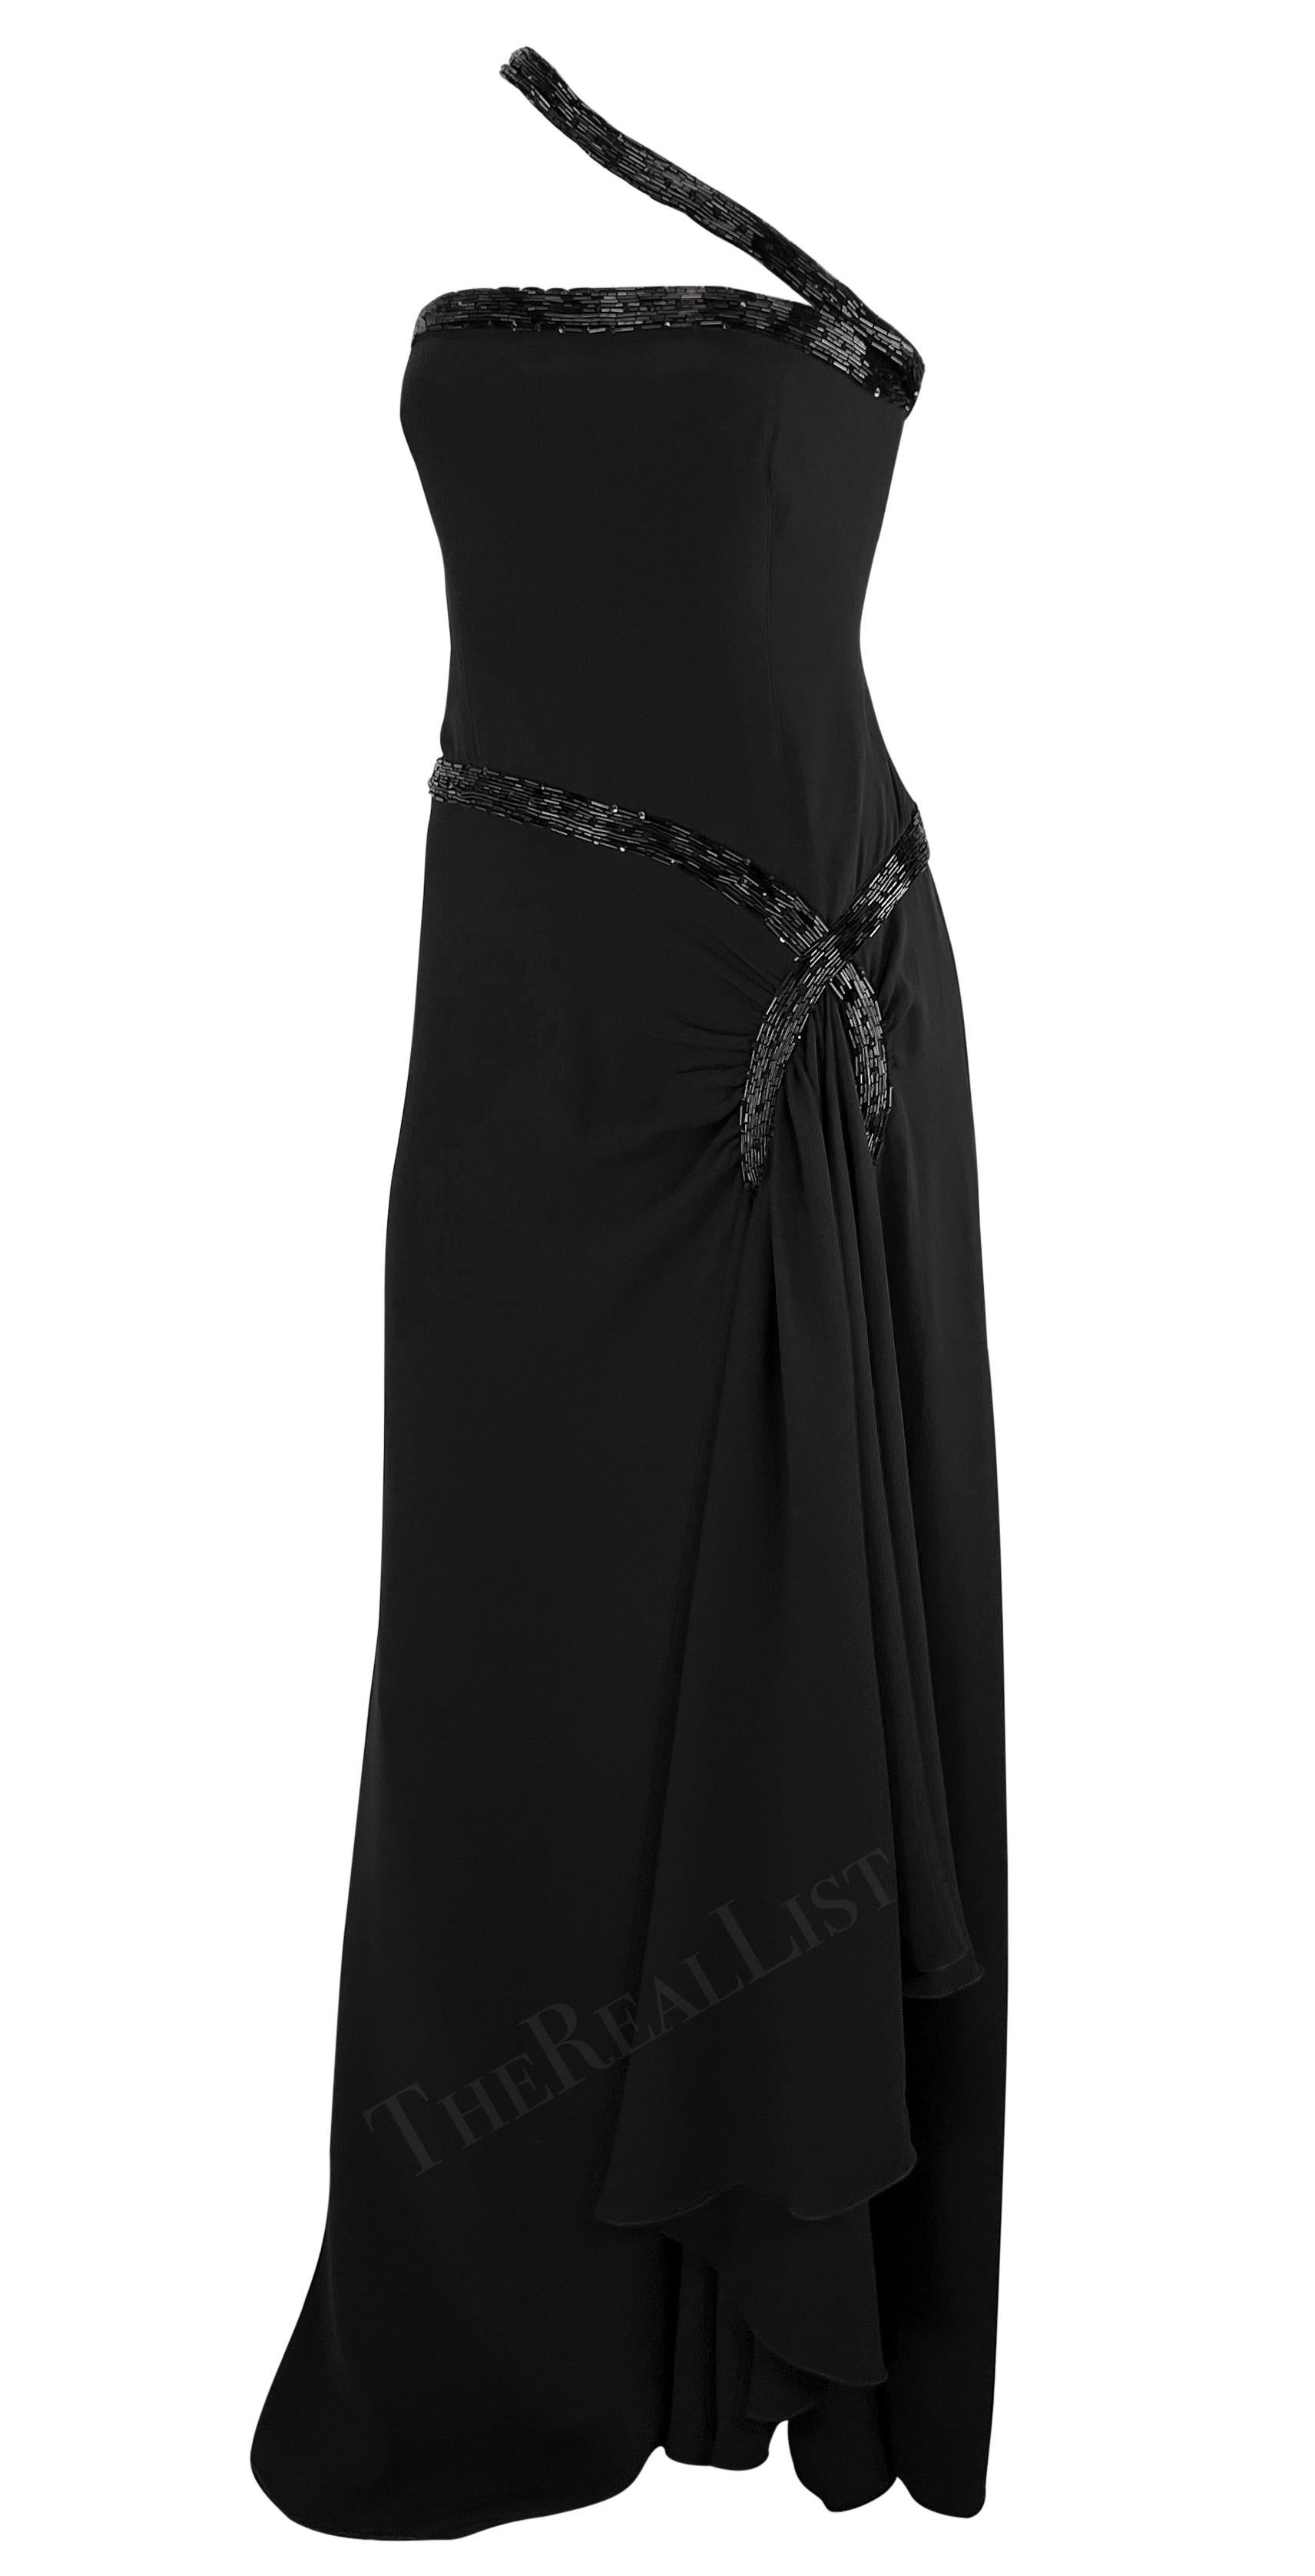 Introducing a fabulous floor-length black beaded gown designed by Valentino Garavani from the mid-2000s. This stunning gown is adorned with intricate black beadwork, adding to its allure. The beads elegantly embellish the shoulder strap, encircle